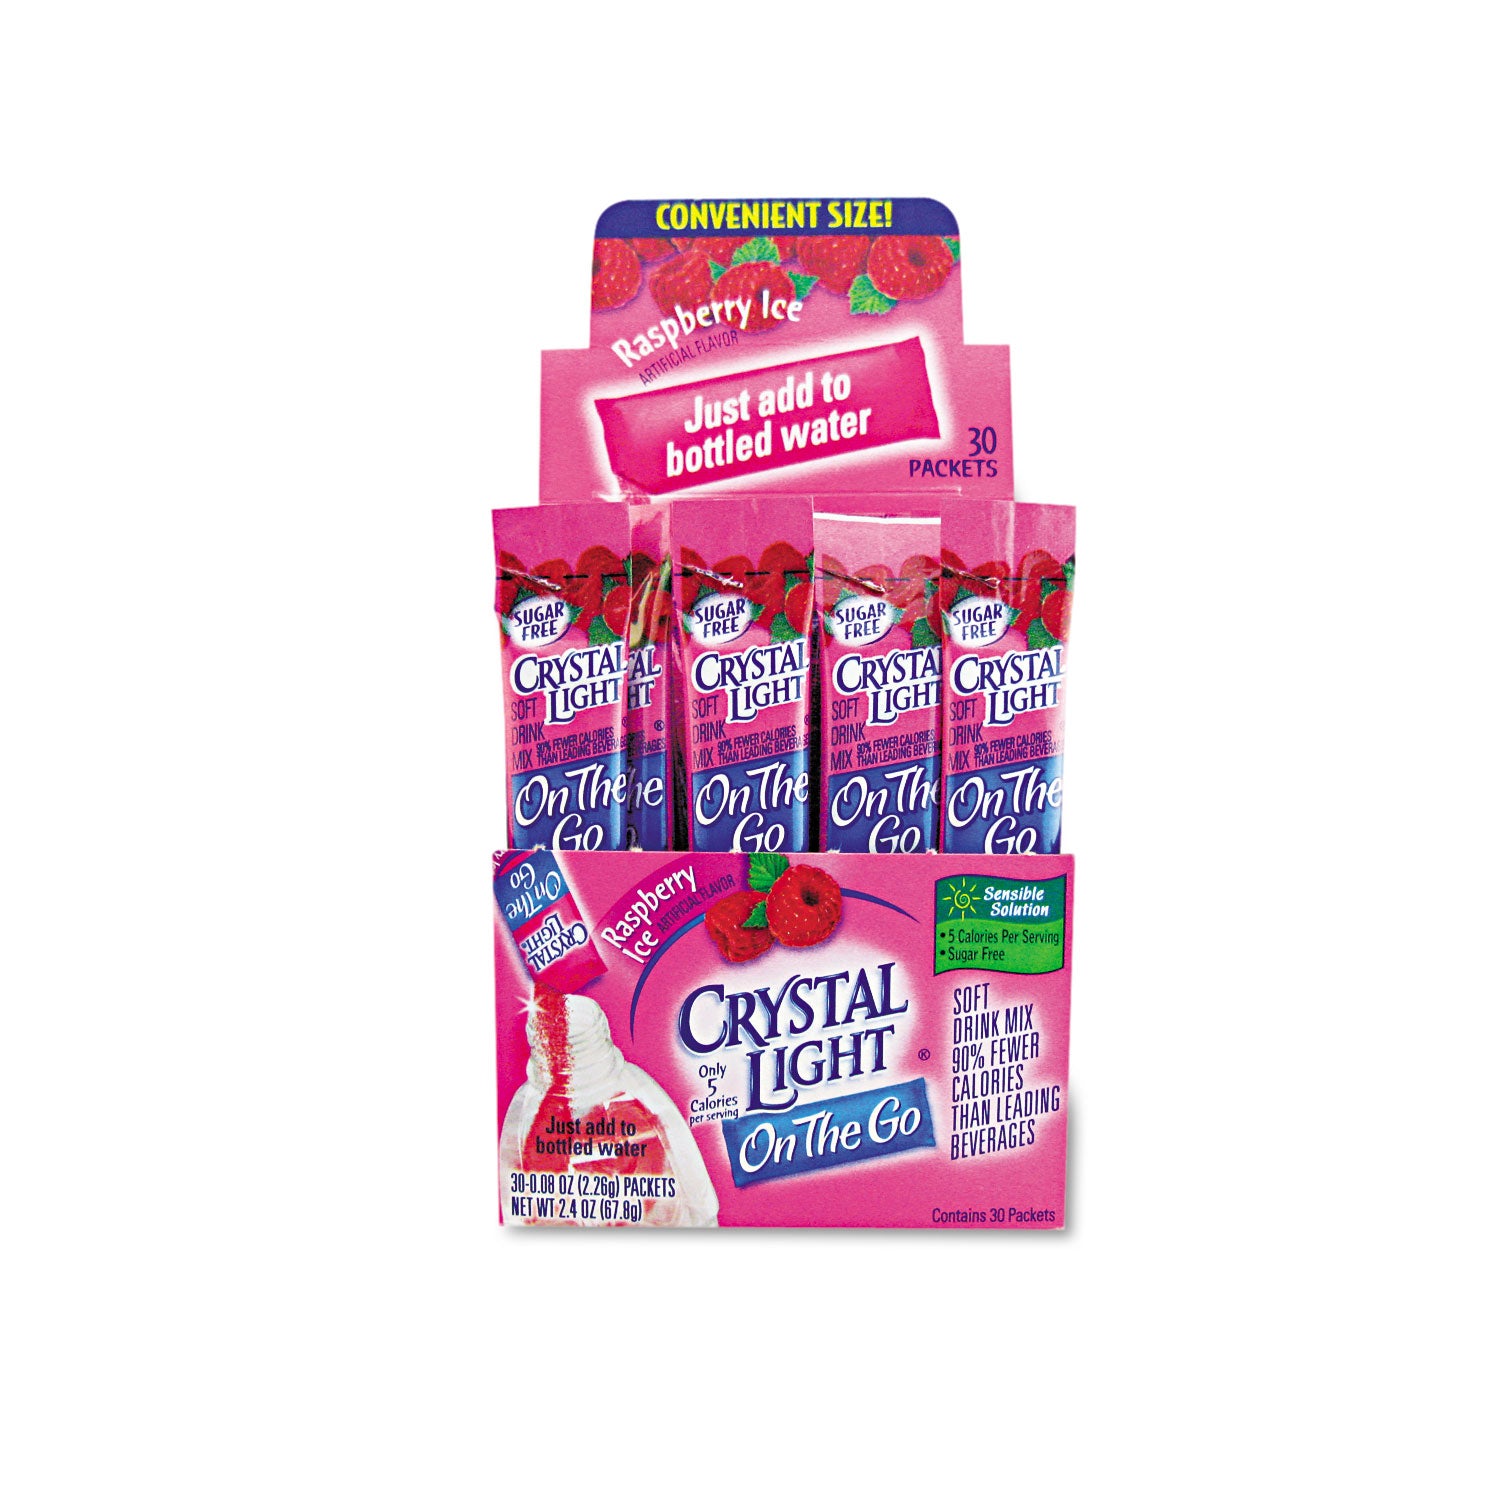 flavored-drink-mix-raspberry-ice-30-08oz-packets-box_cry79800 - 3